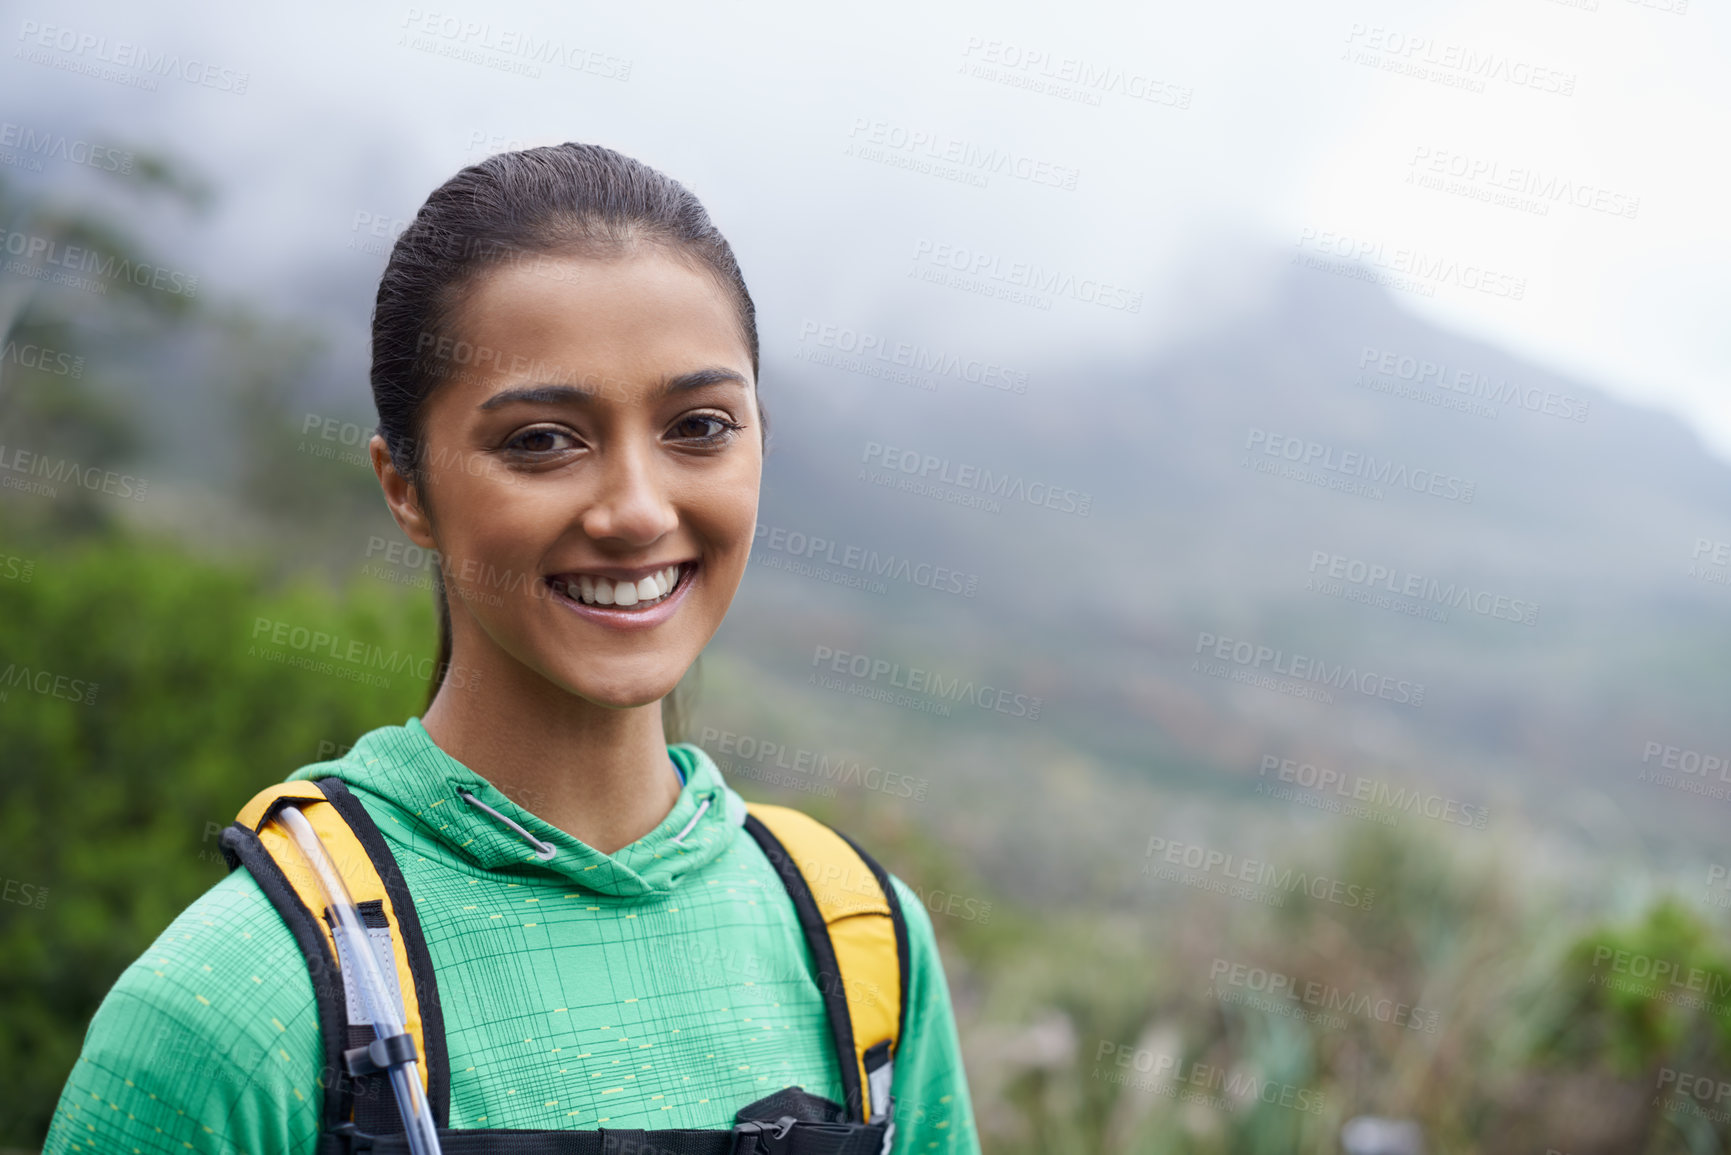 Buy stock photo A beautiful young woman standing against a backdrop of scenic mountains about to go for a hike